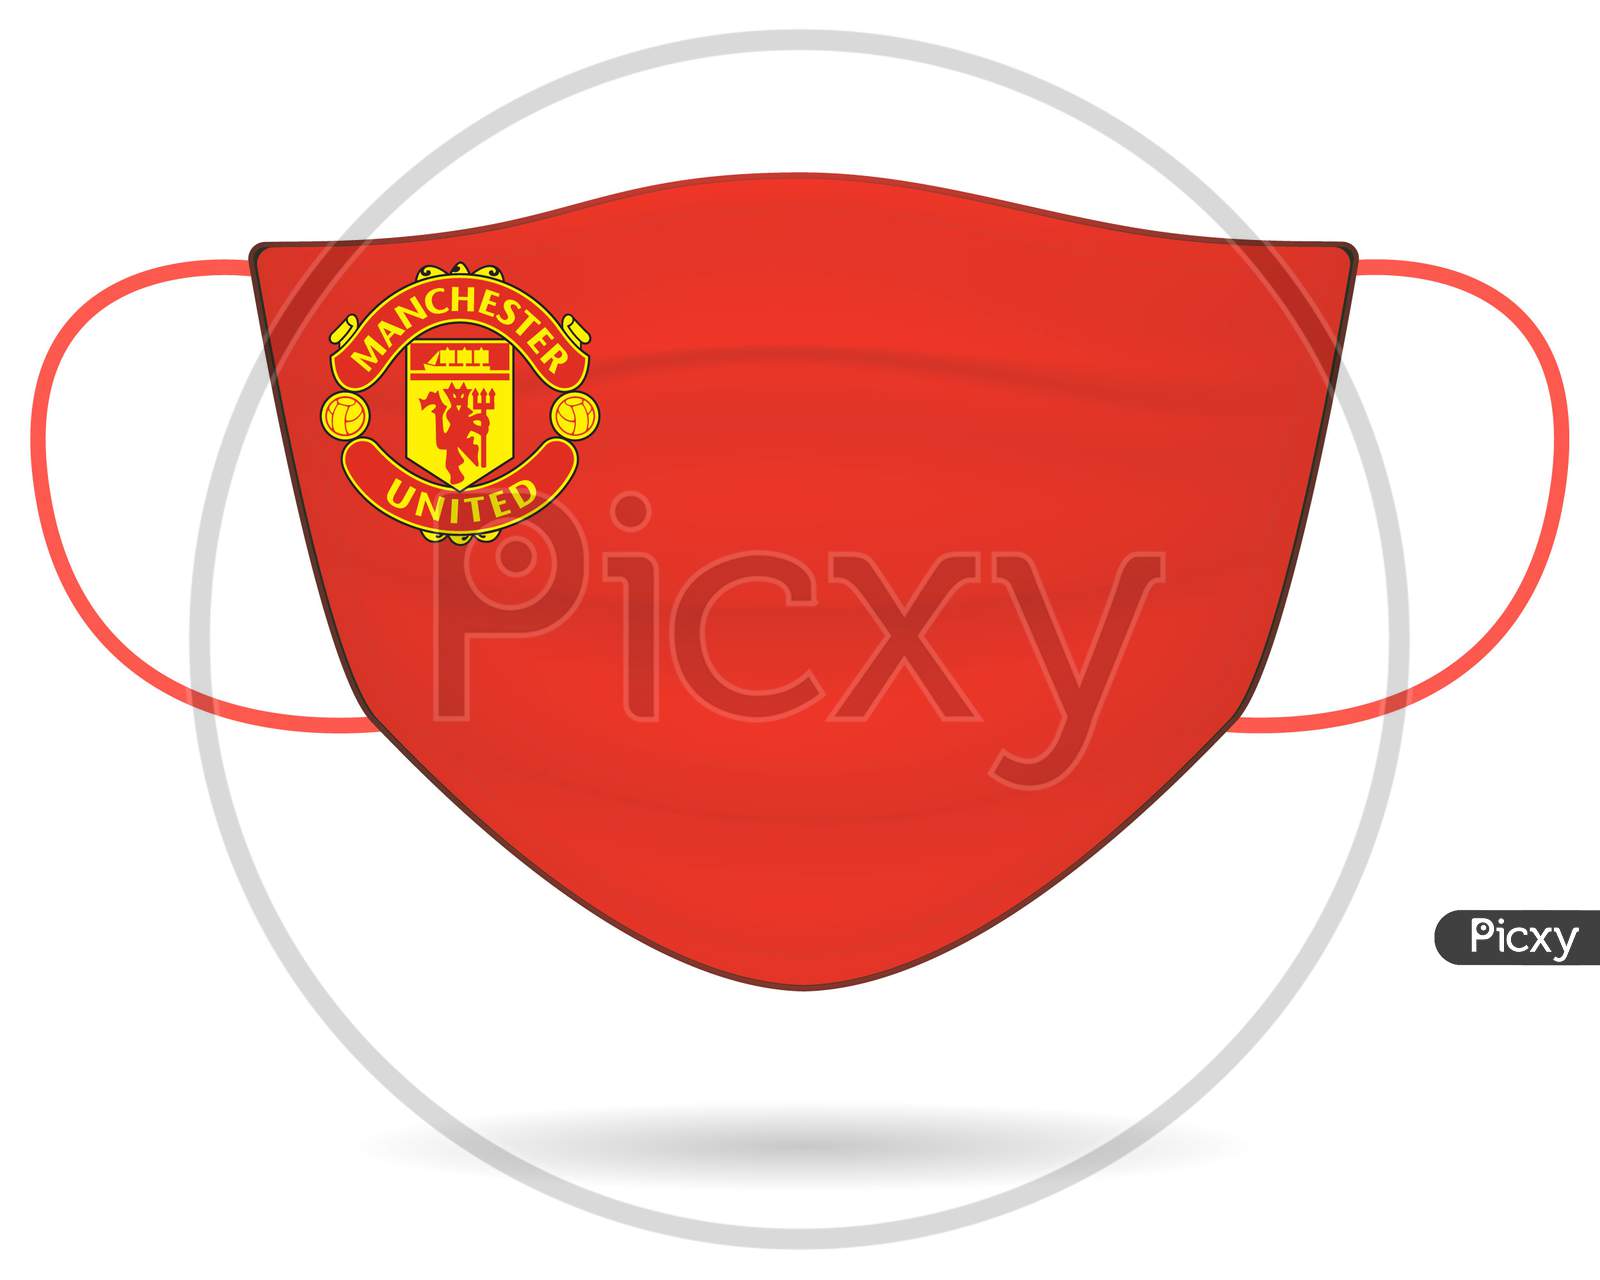 Surgical Face Mask With Manchetster United Football Club Logo In Covid-19, Wear Mask & Stay Safe, New Normal- Corona Virus Pandemic.